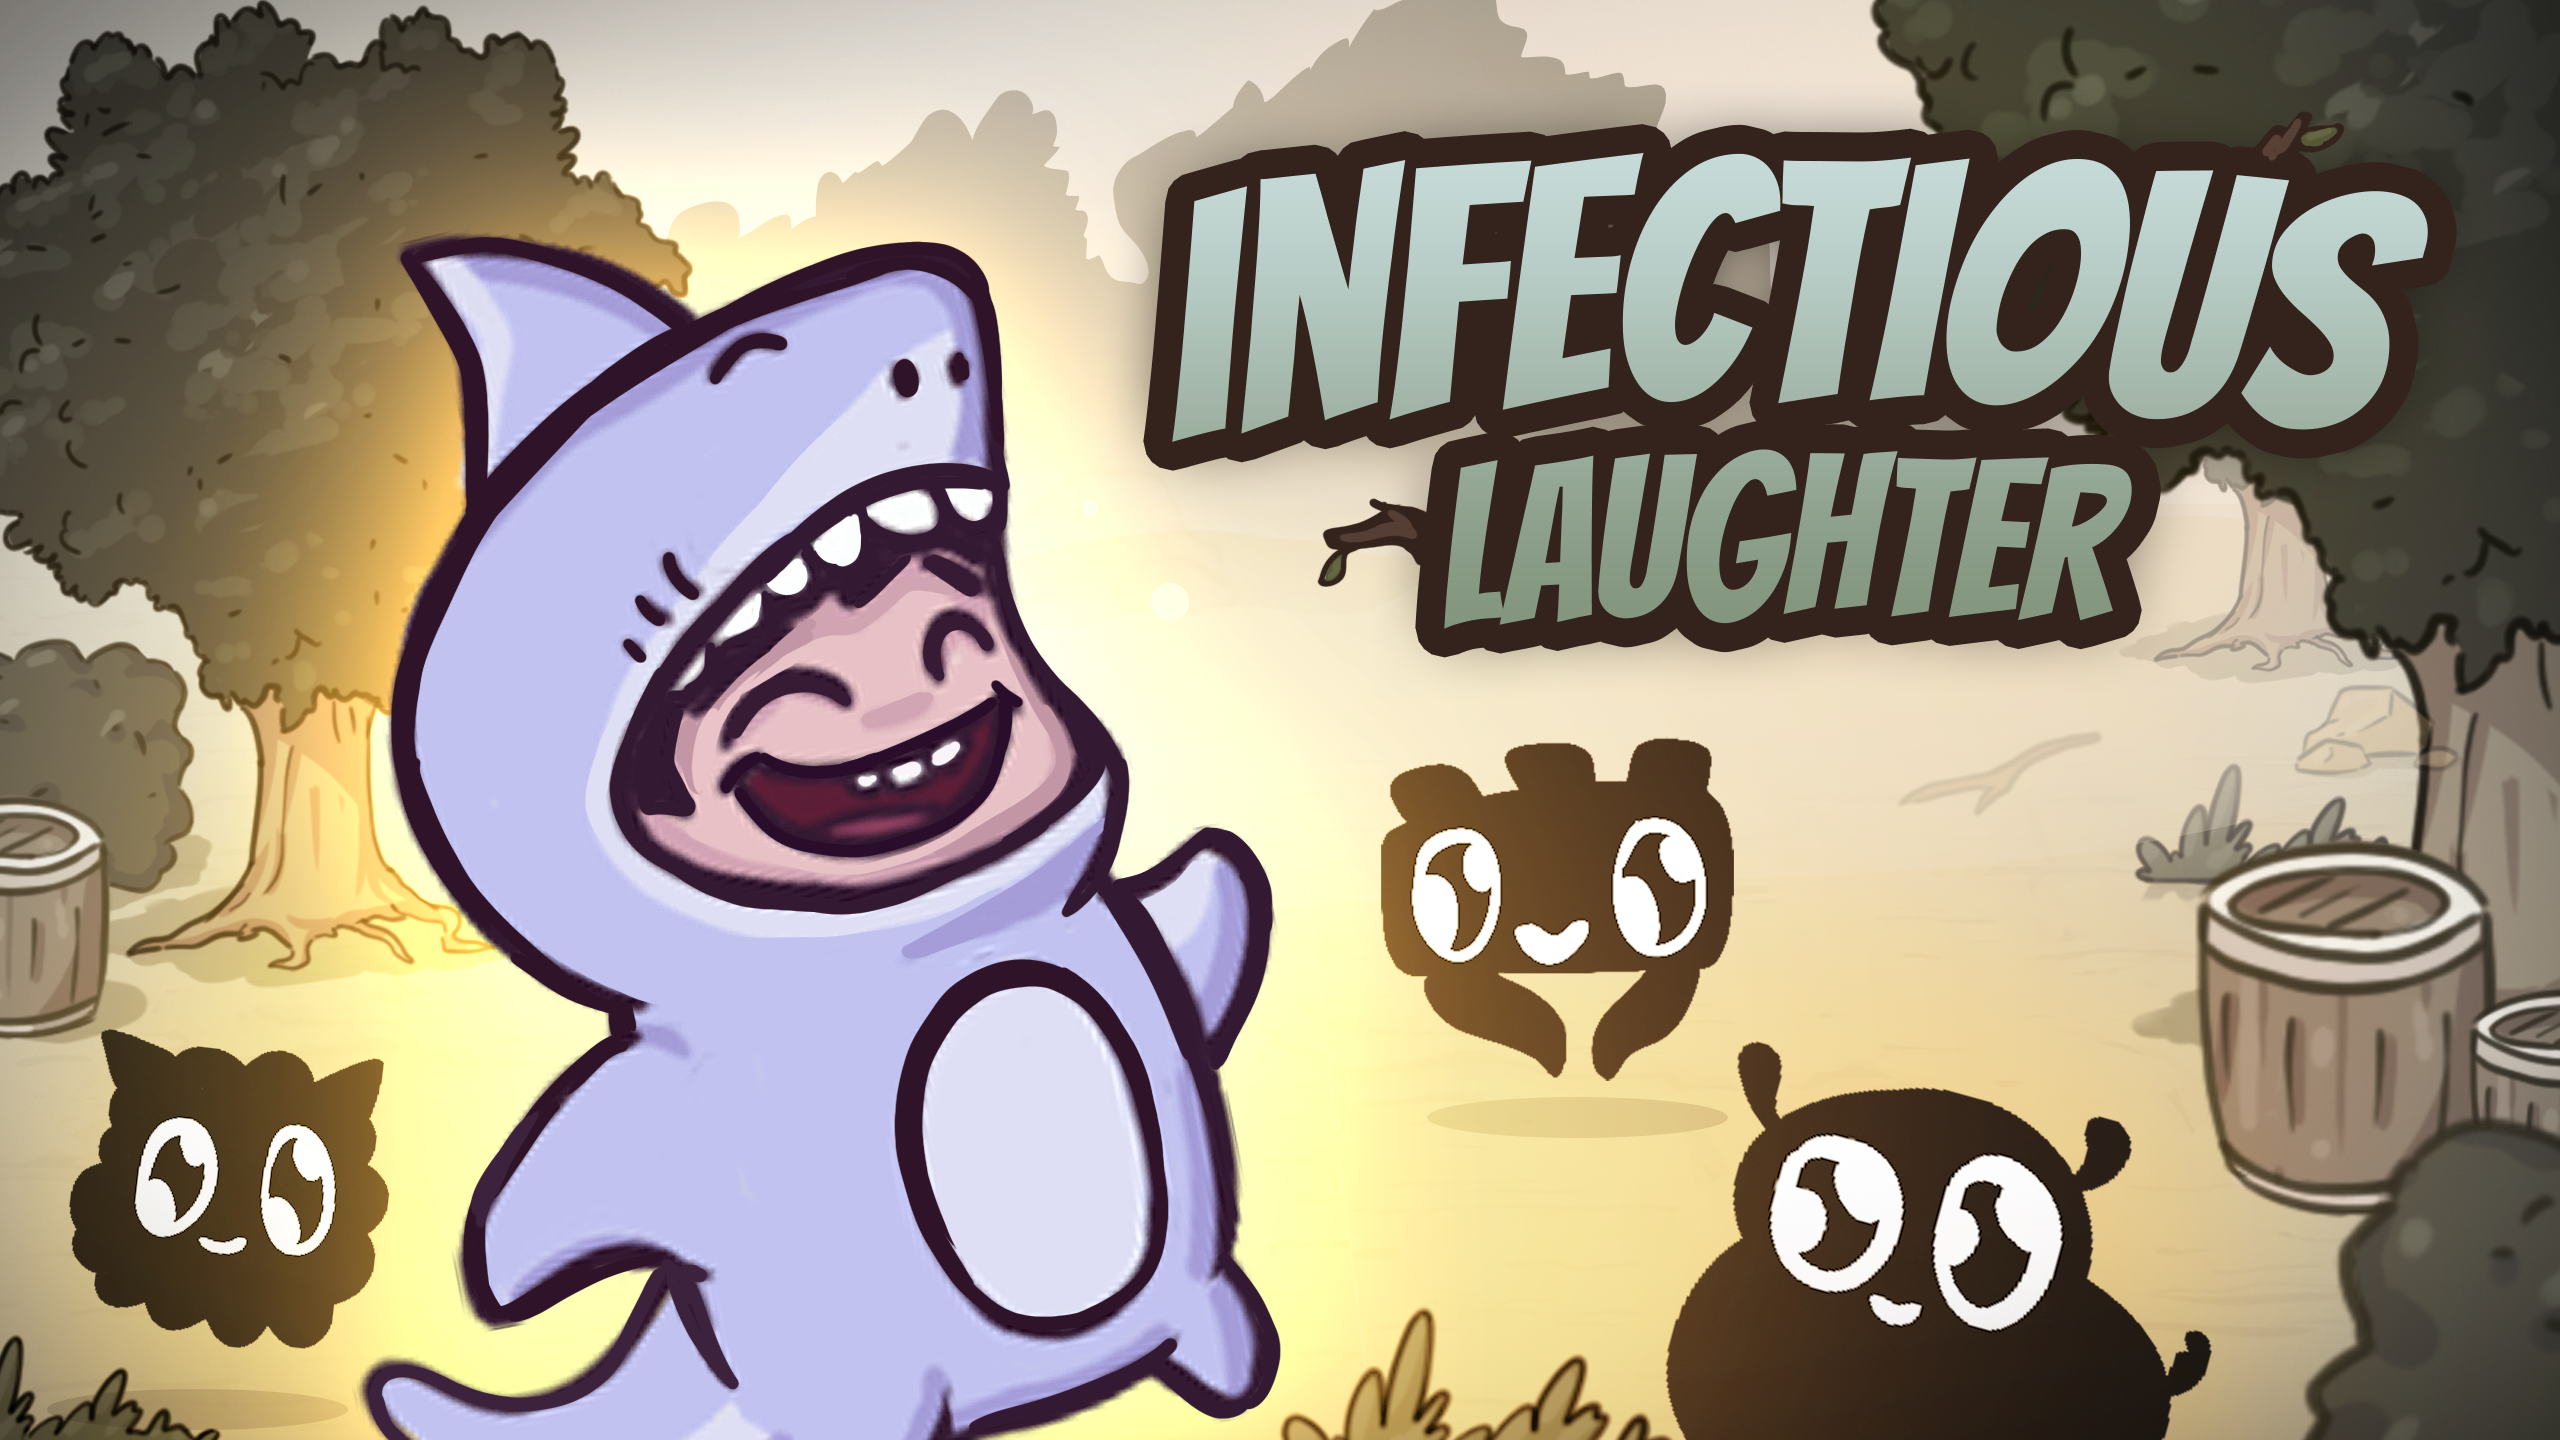 Infectious Laughter